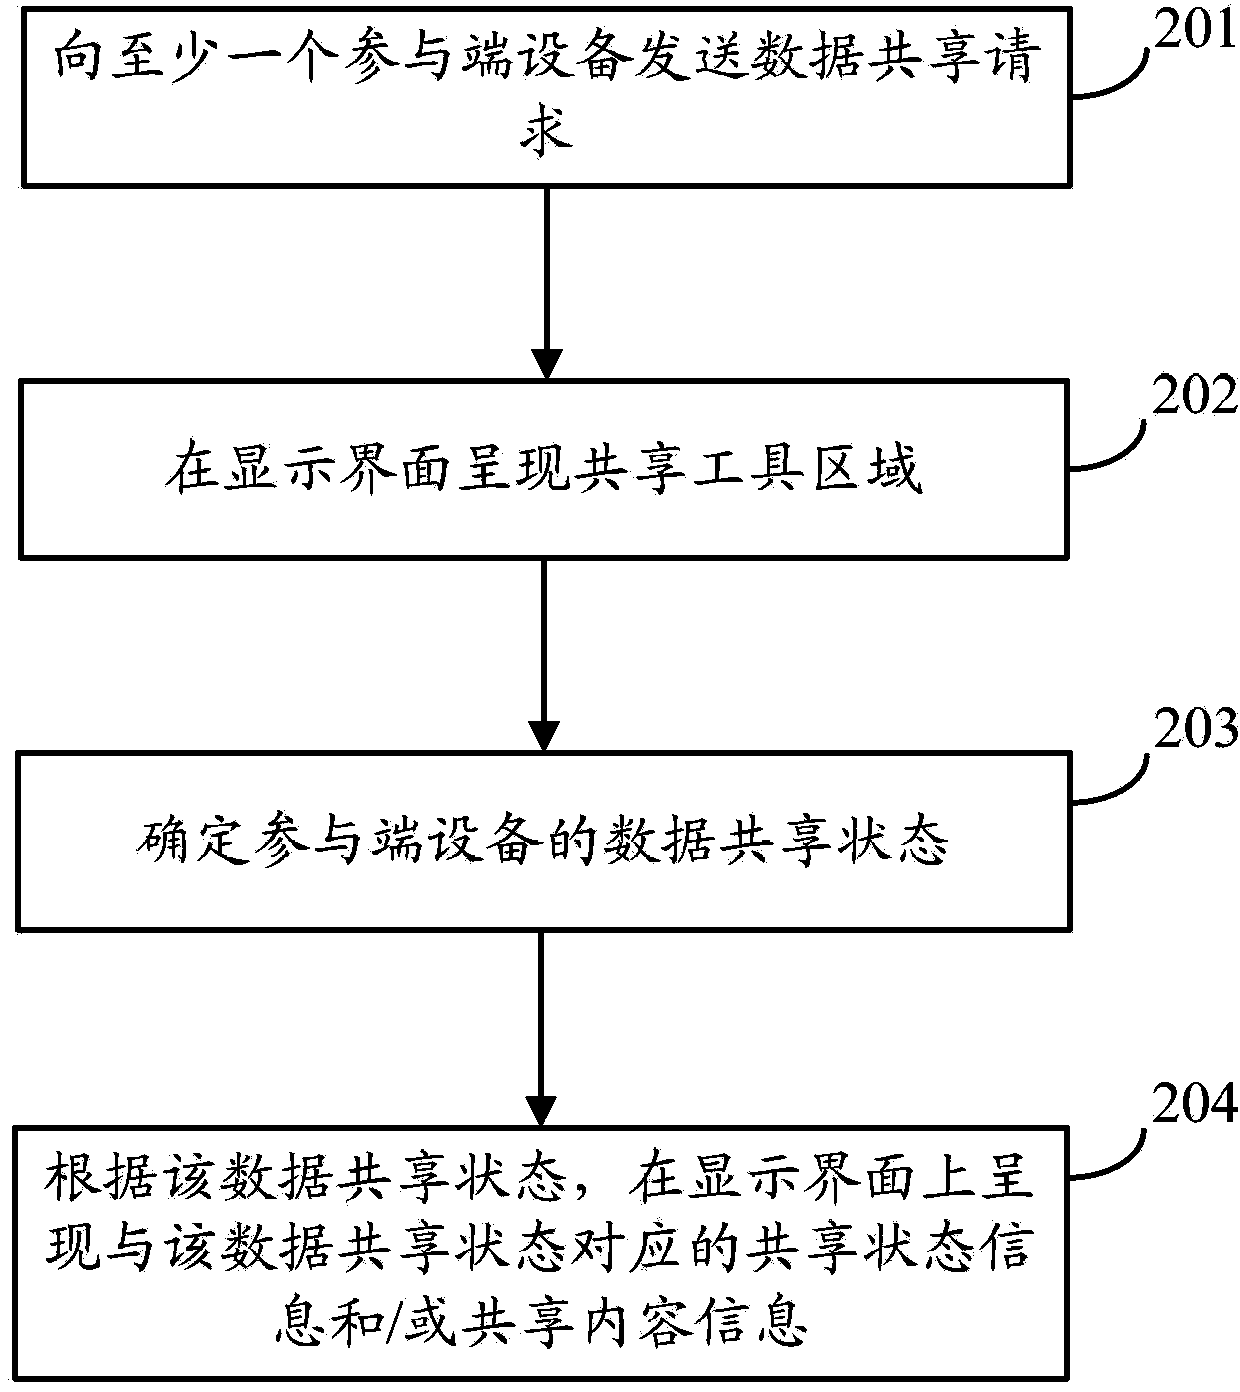 Method and equipment for presenting shared information in data sharing process through demonstration side equipment